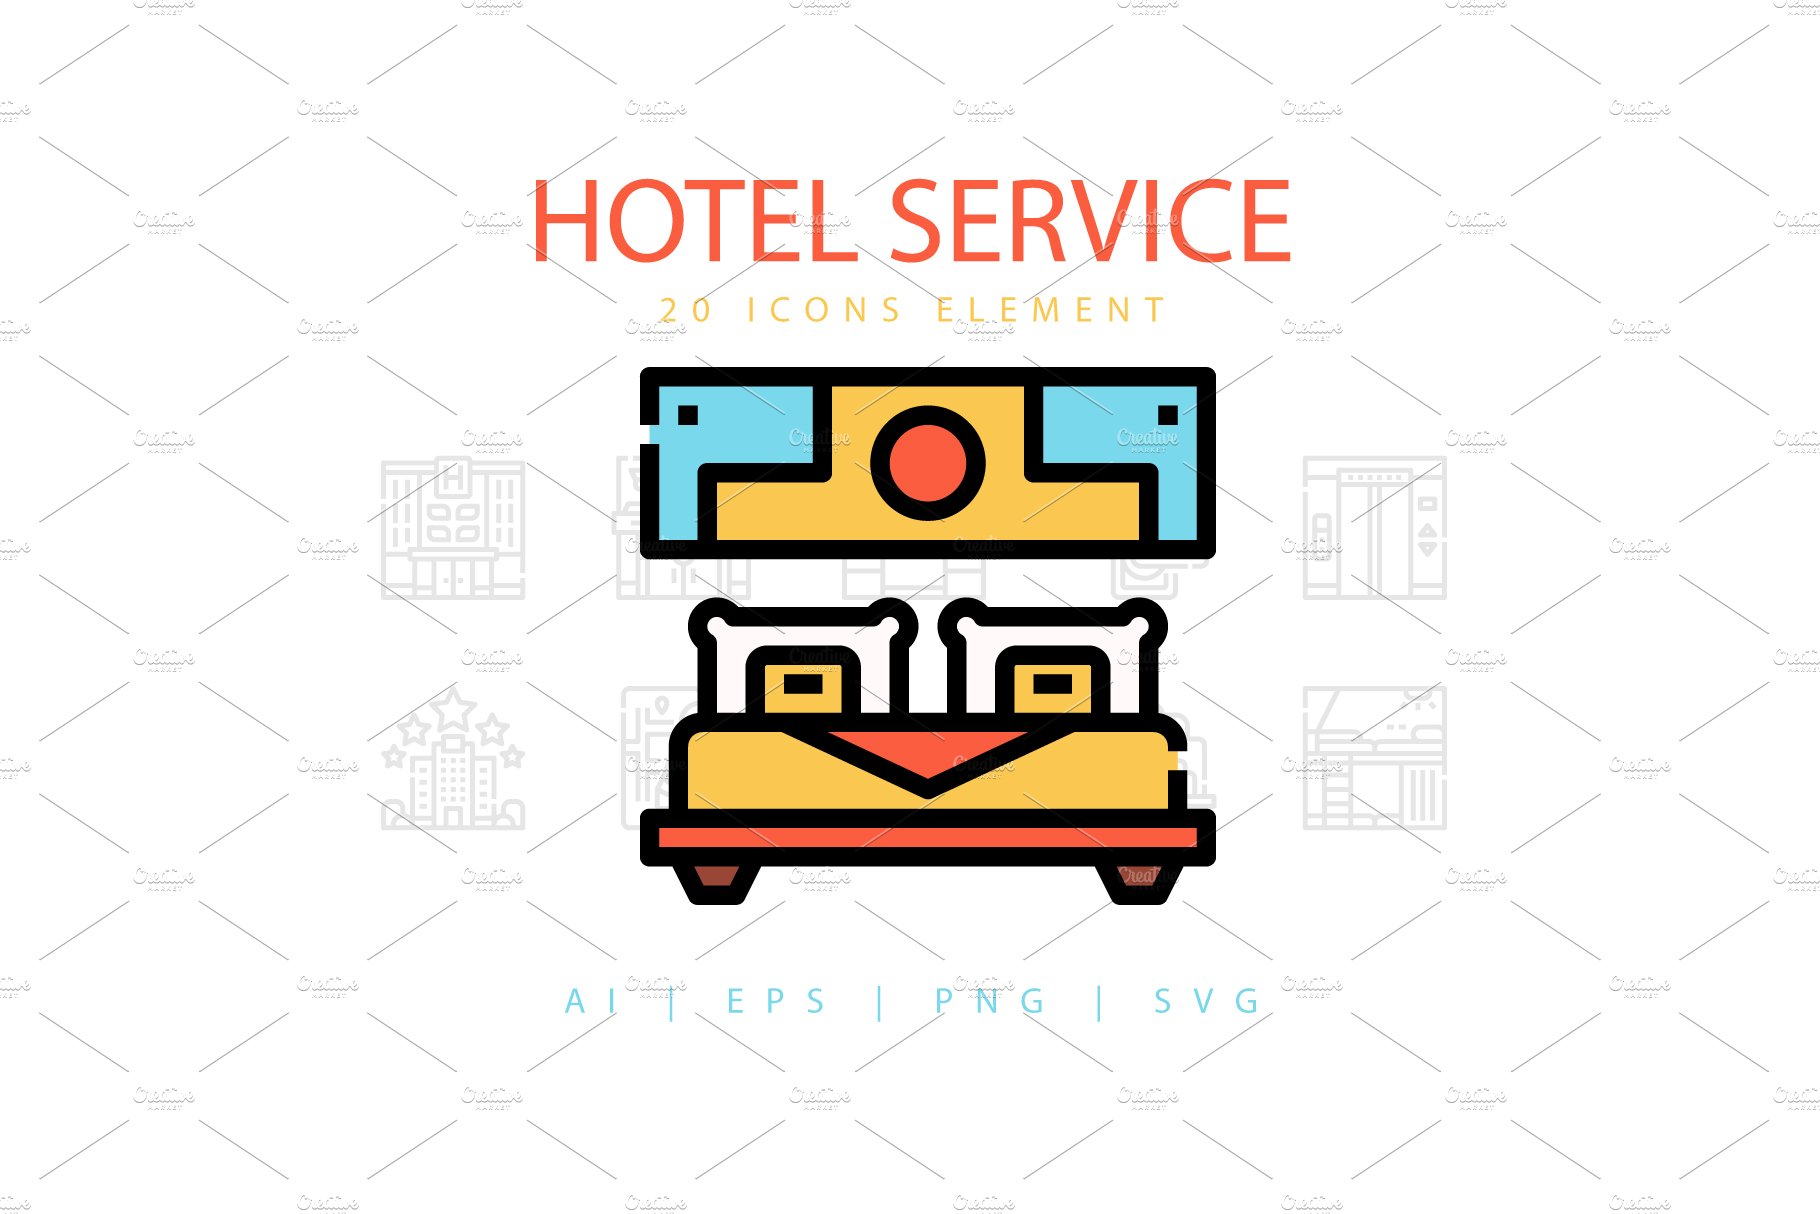 HOTEL SERVICE ICONS PACKS cover image.